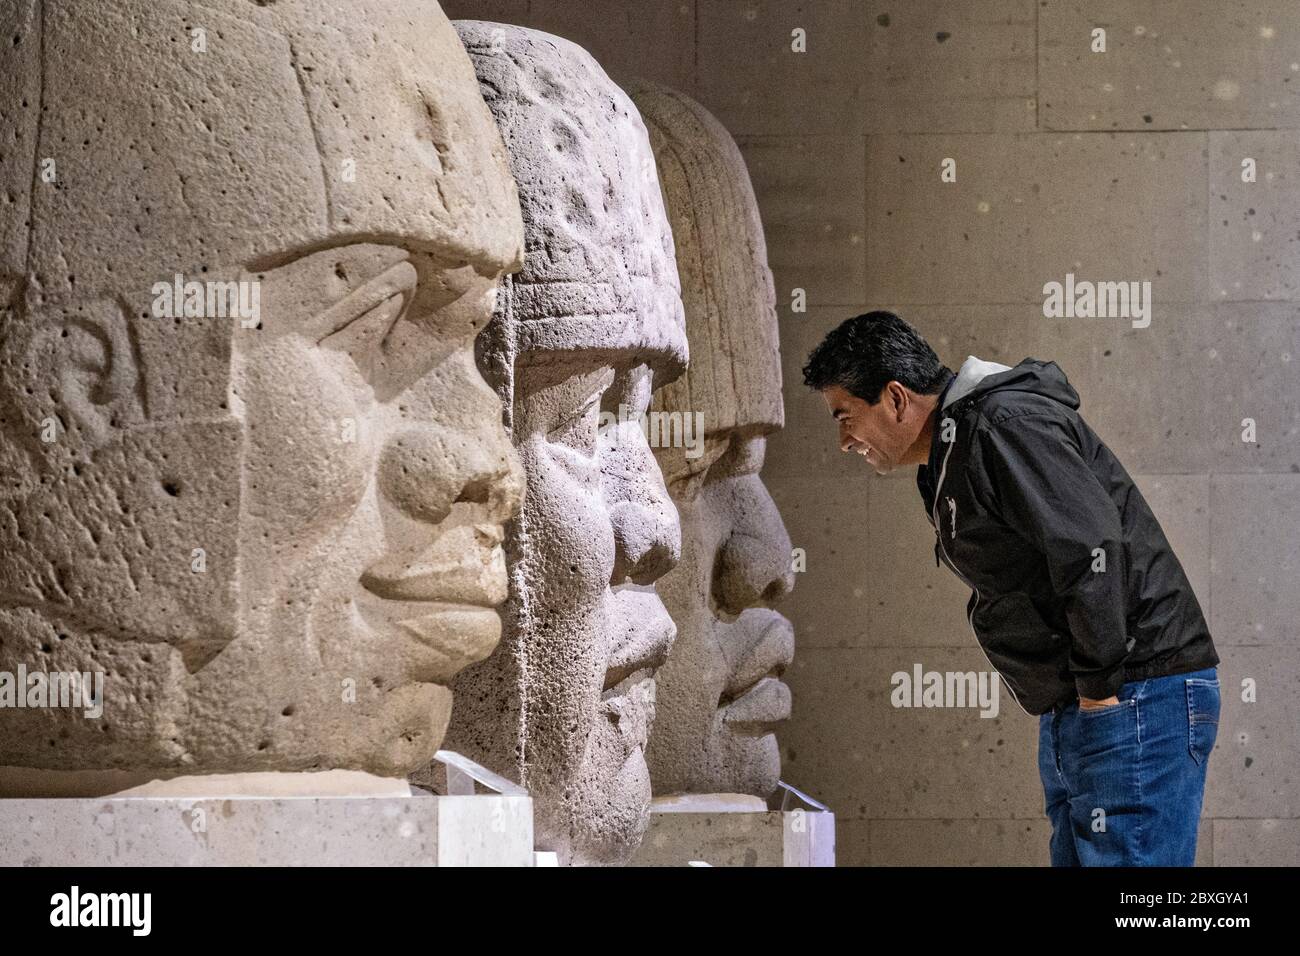 Tourist view colossal Olmec stone heads at the Museum of Anthropology in the historic center of Xalapa, Veracruz, Mexico. The Olmec civilization was the earliest known major Mesoamerican civilizations dating roughly from 1500 BCE to about 400 BCE. Stock Photo